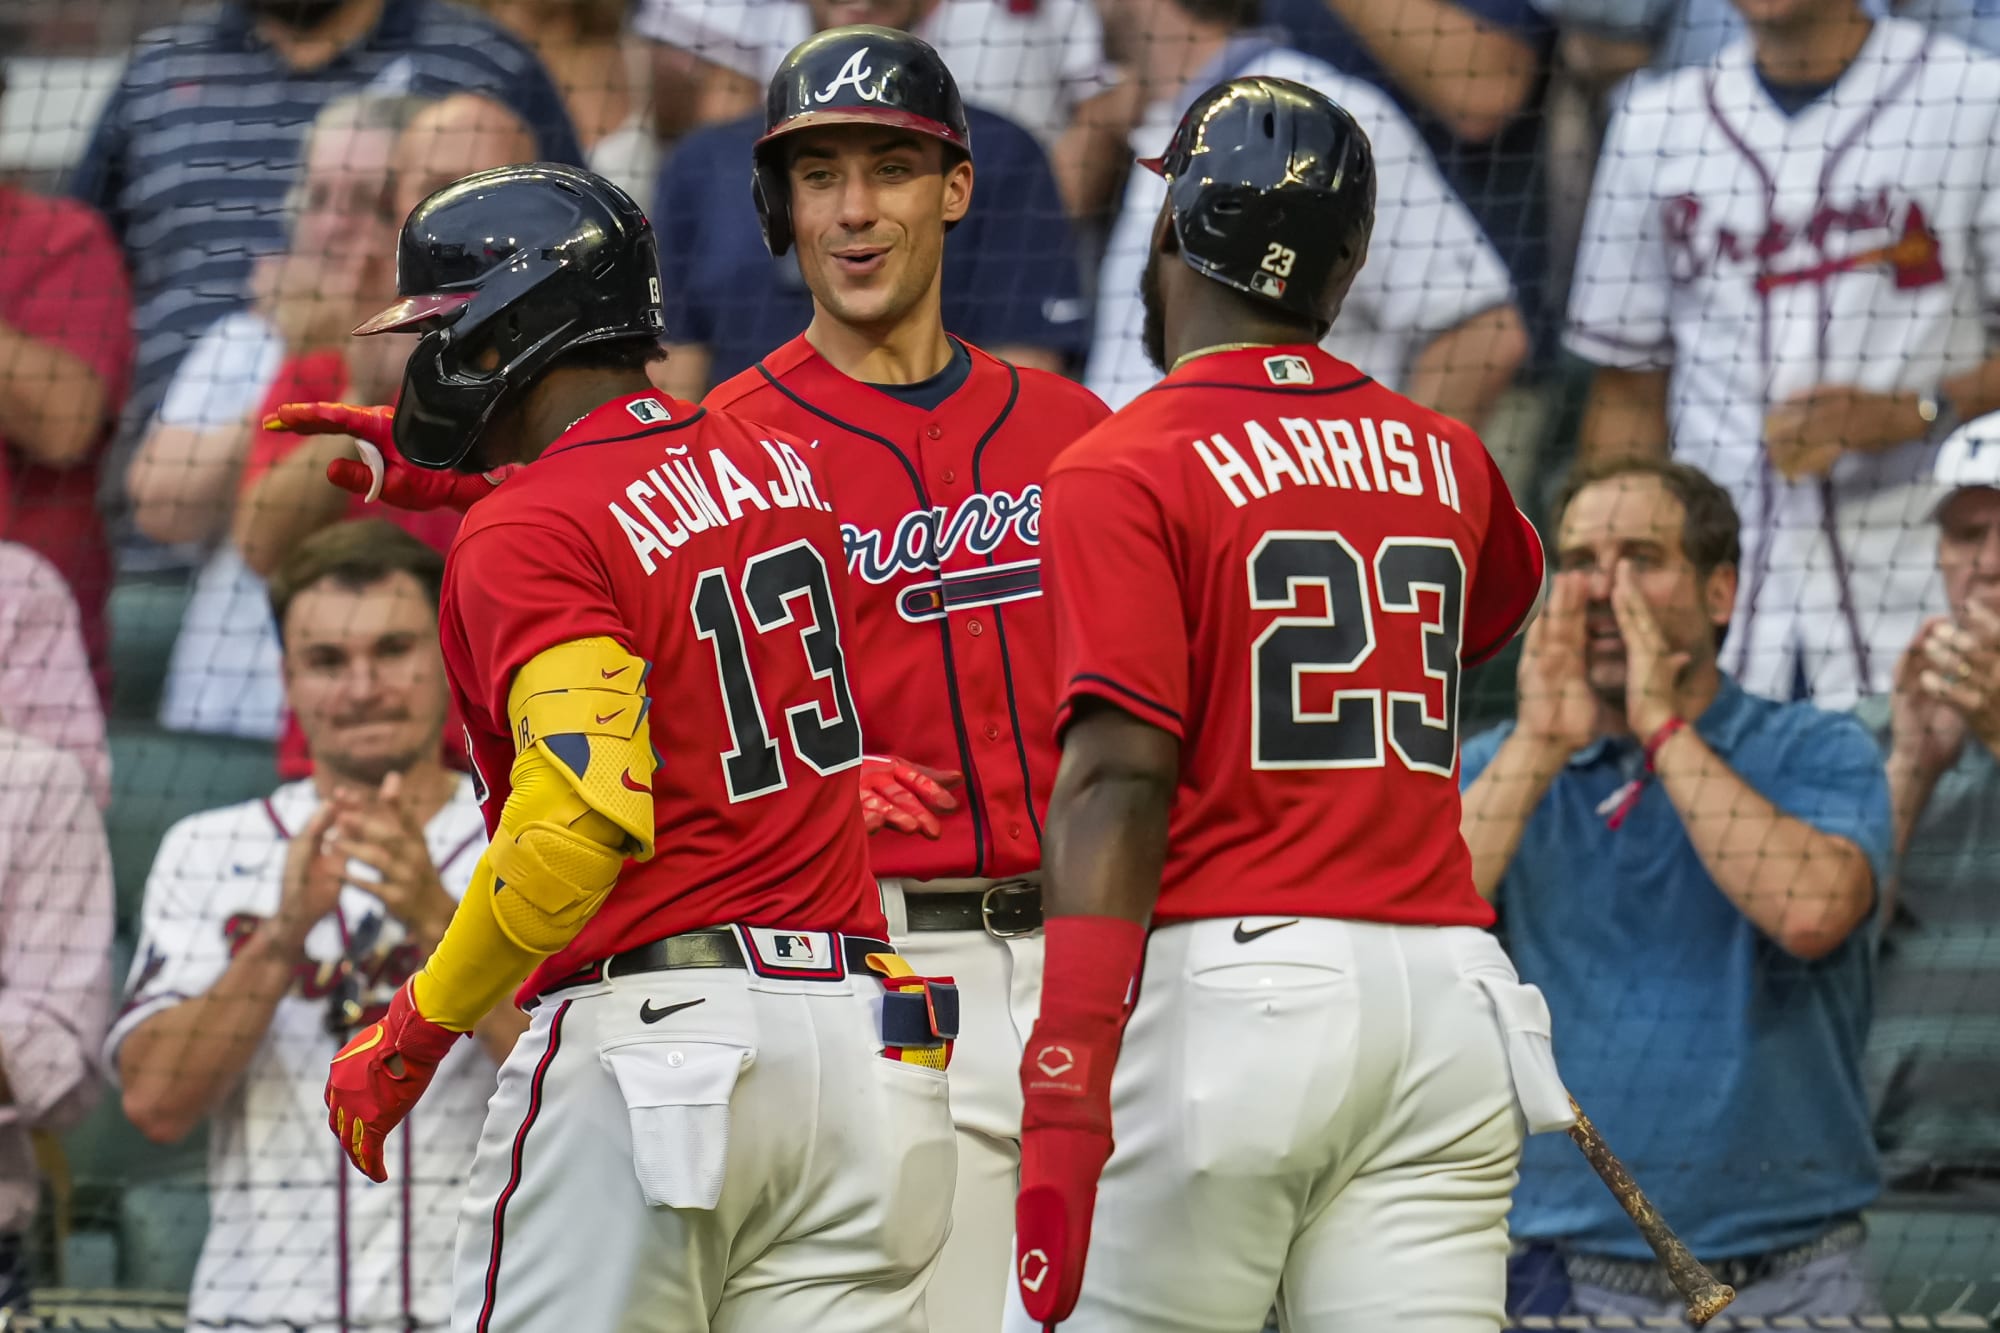 Atlanta Braves: 3 contract extensions the Braves need